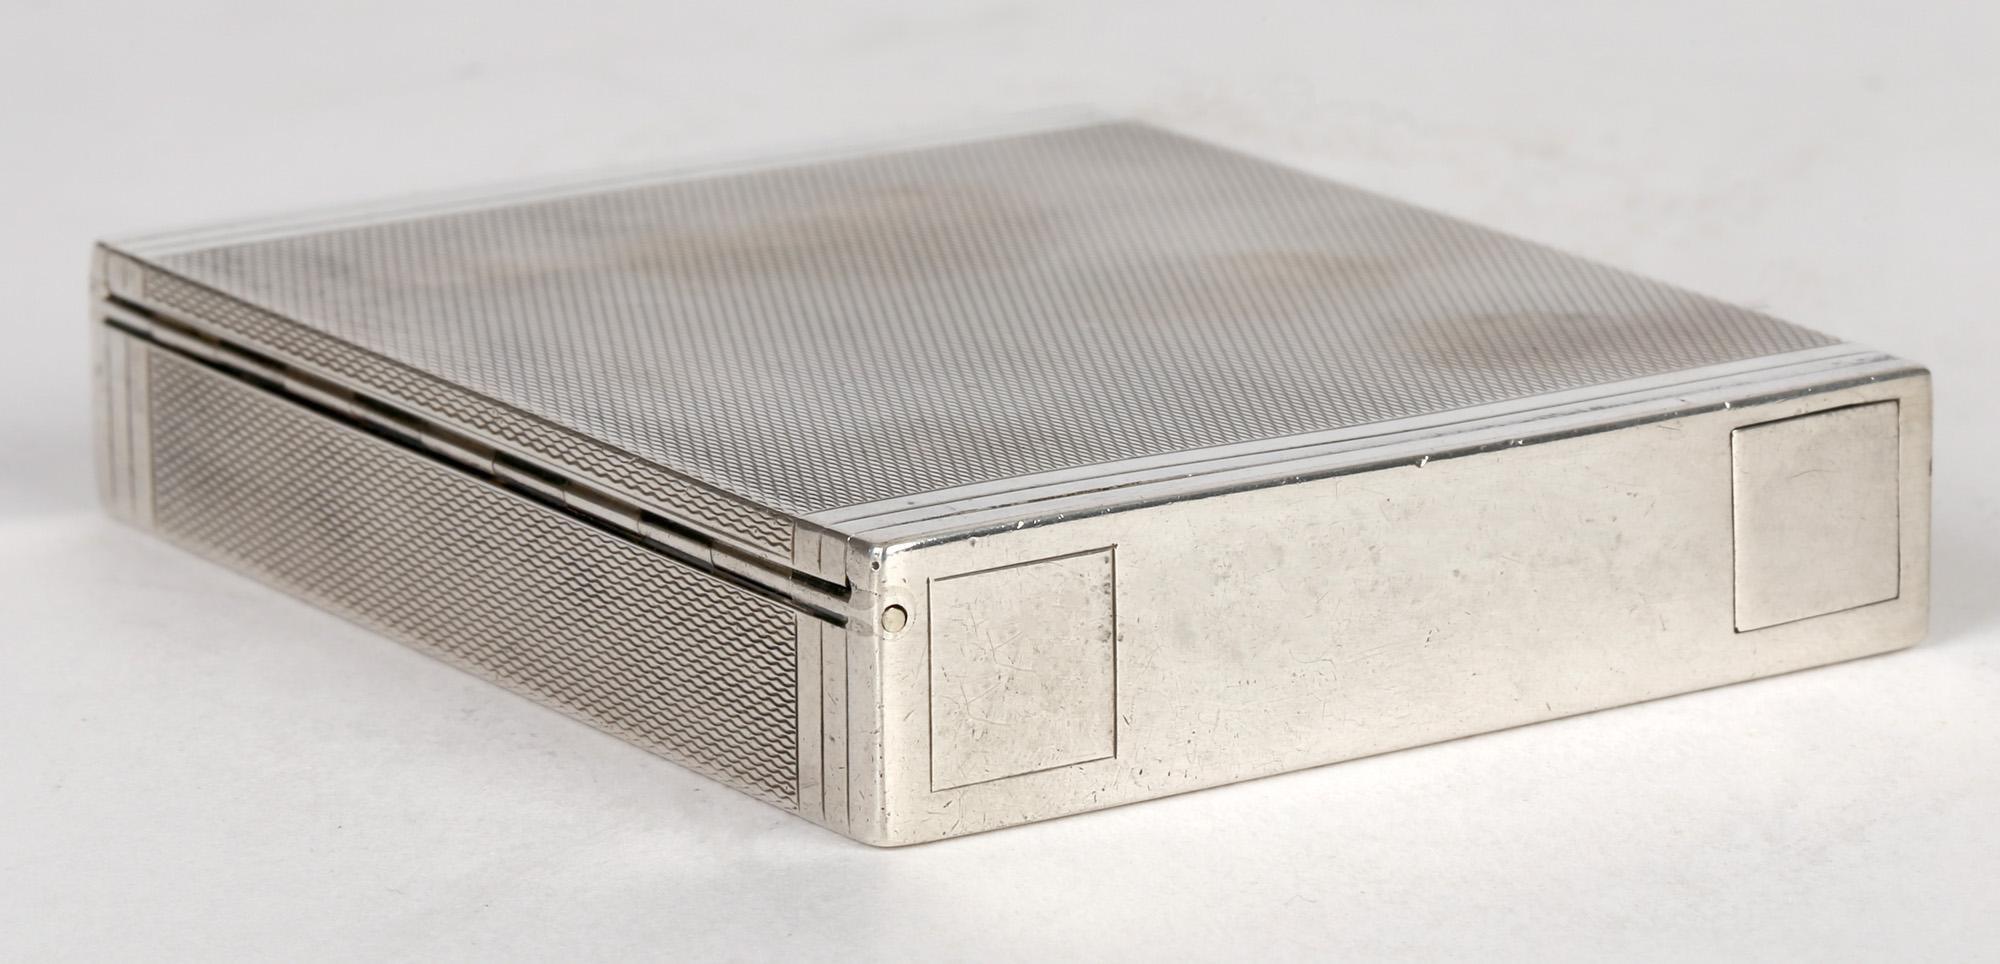 Cartier London Art Deco Silver Cigarette or Card Case with Machined Patterning 10